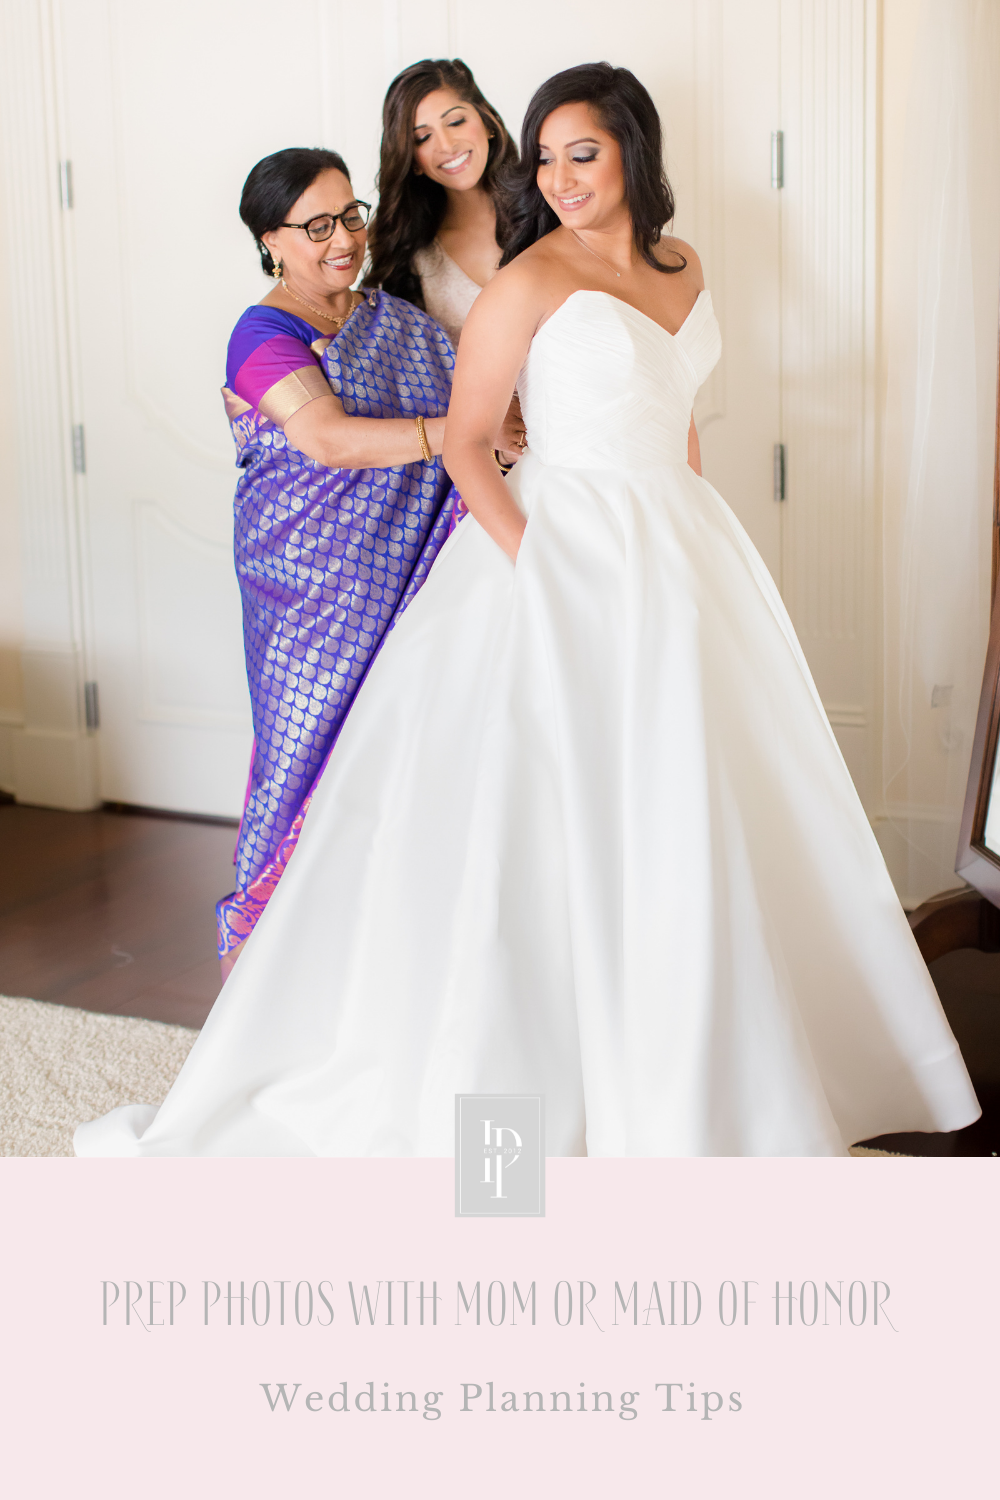 Prep Photos with Mom or Maid of Honor: getting ready photo ideas for your wedding morning from NJ wedding photographer, Idalia Photography